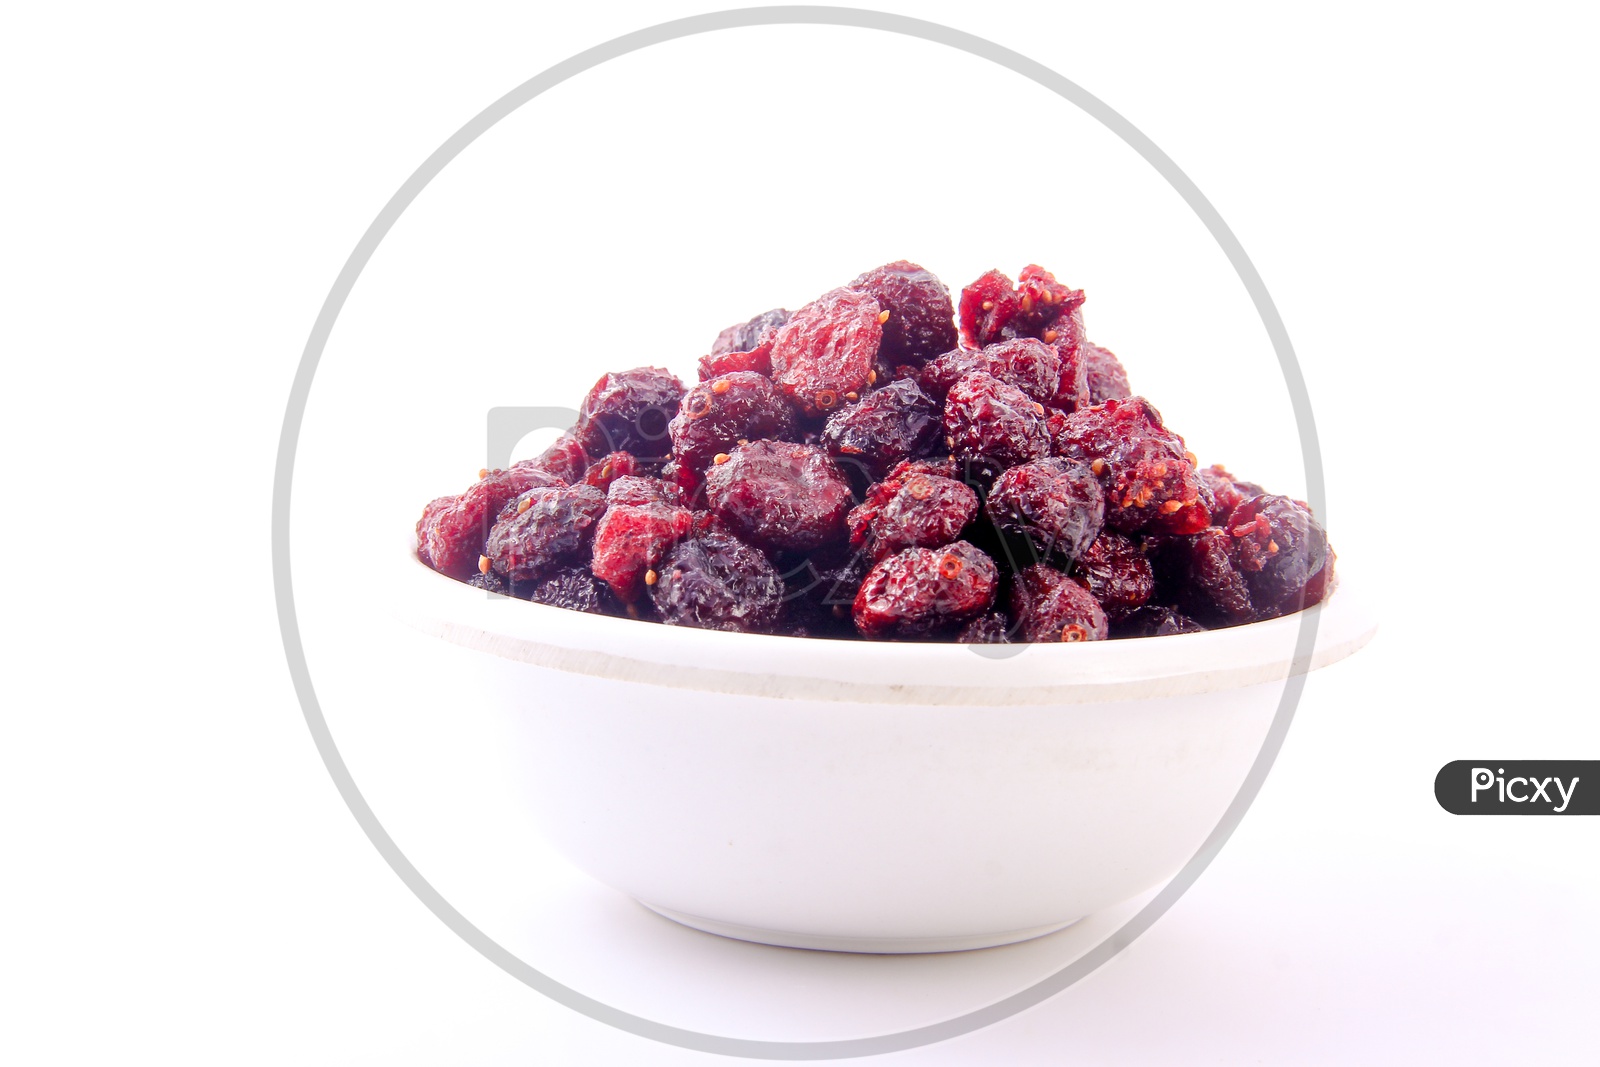 Dried Red berries In a Bowl On an Isolated White Background